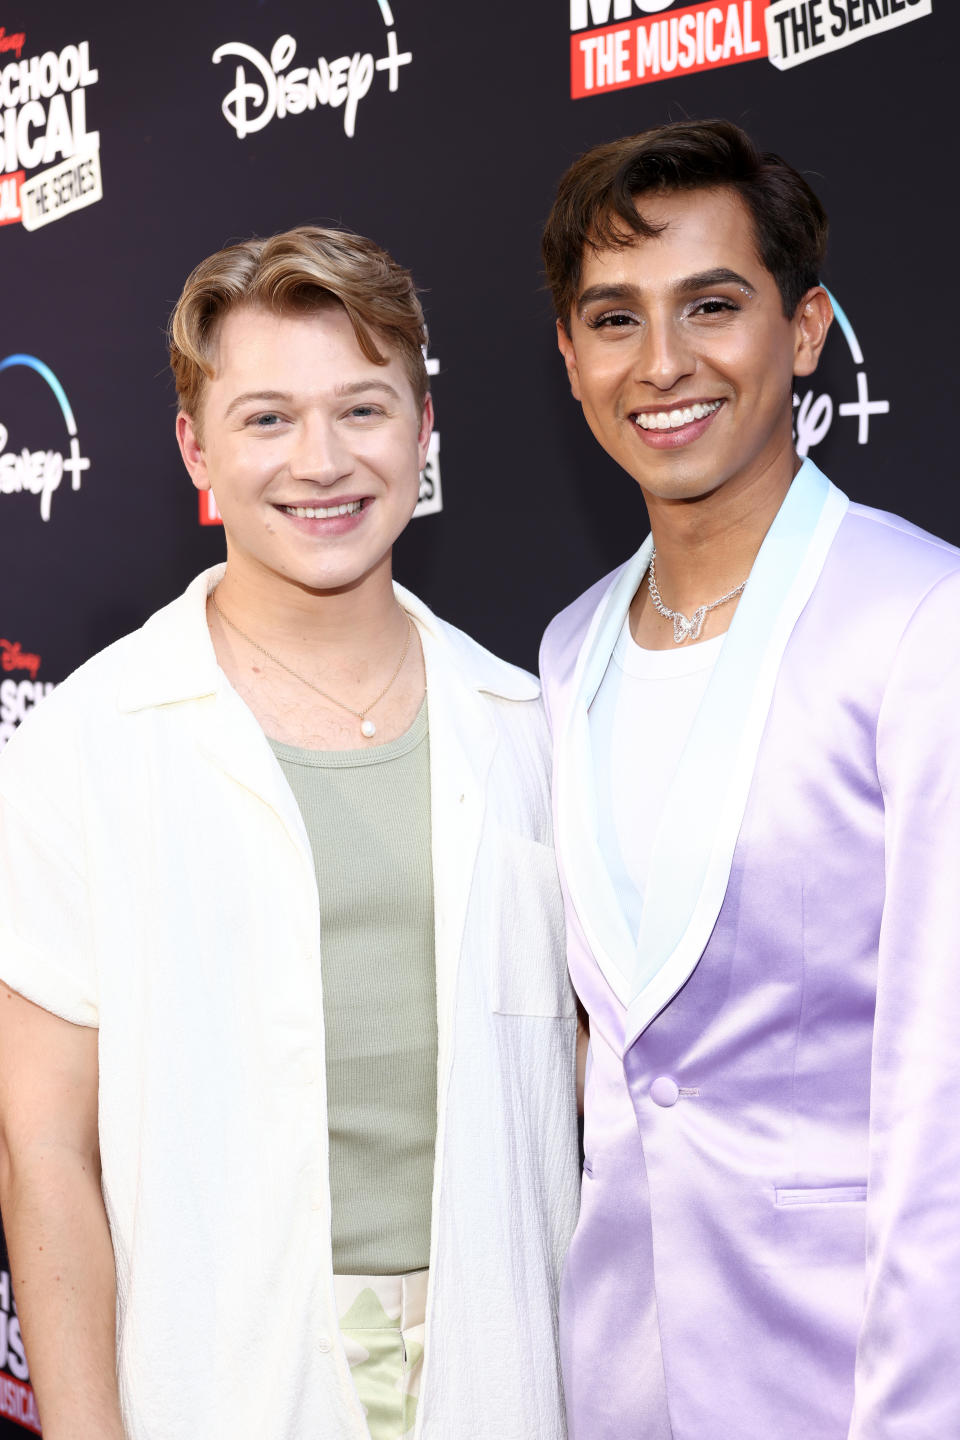 Two actors from "High School Musical: The Musical" smiling at a promotional event. One wears a white outfit, the other a lavender suit